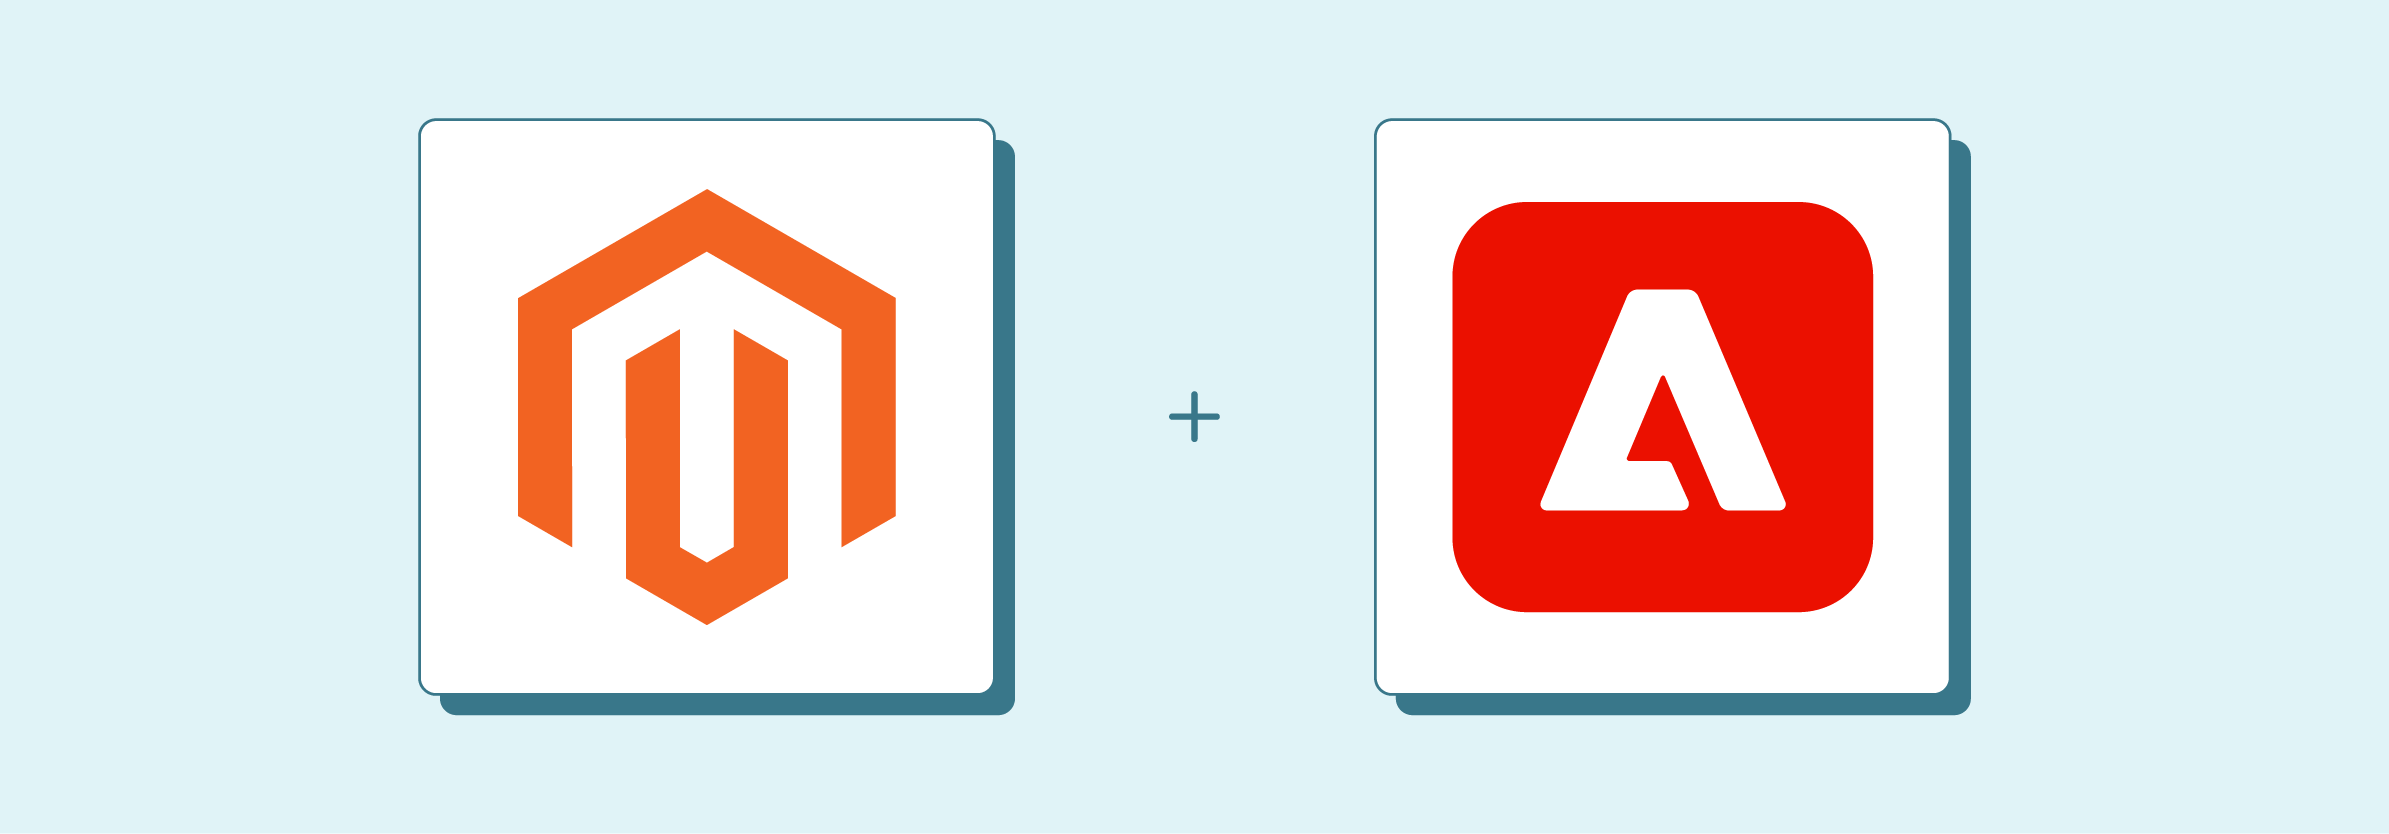 Magento seamlessly integrated with Adobe Commerce for enhanced ecommerce solutions